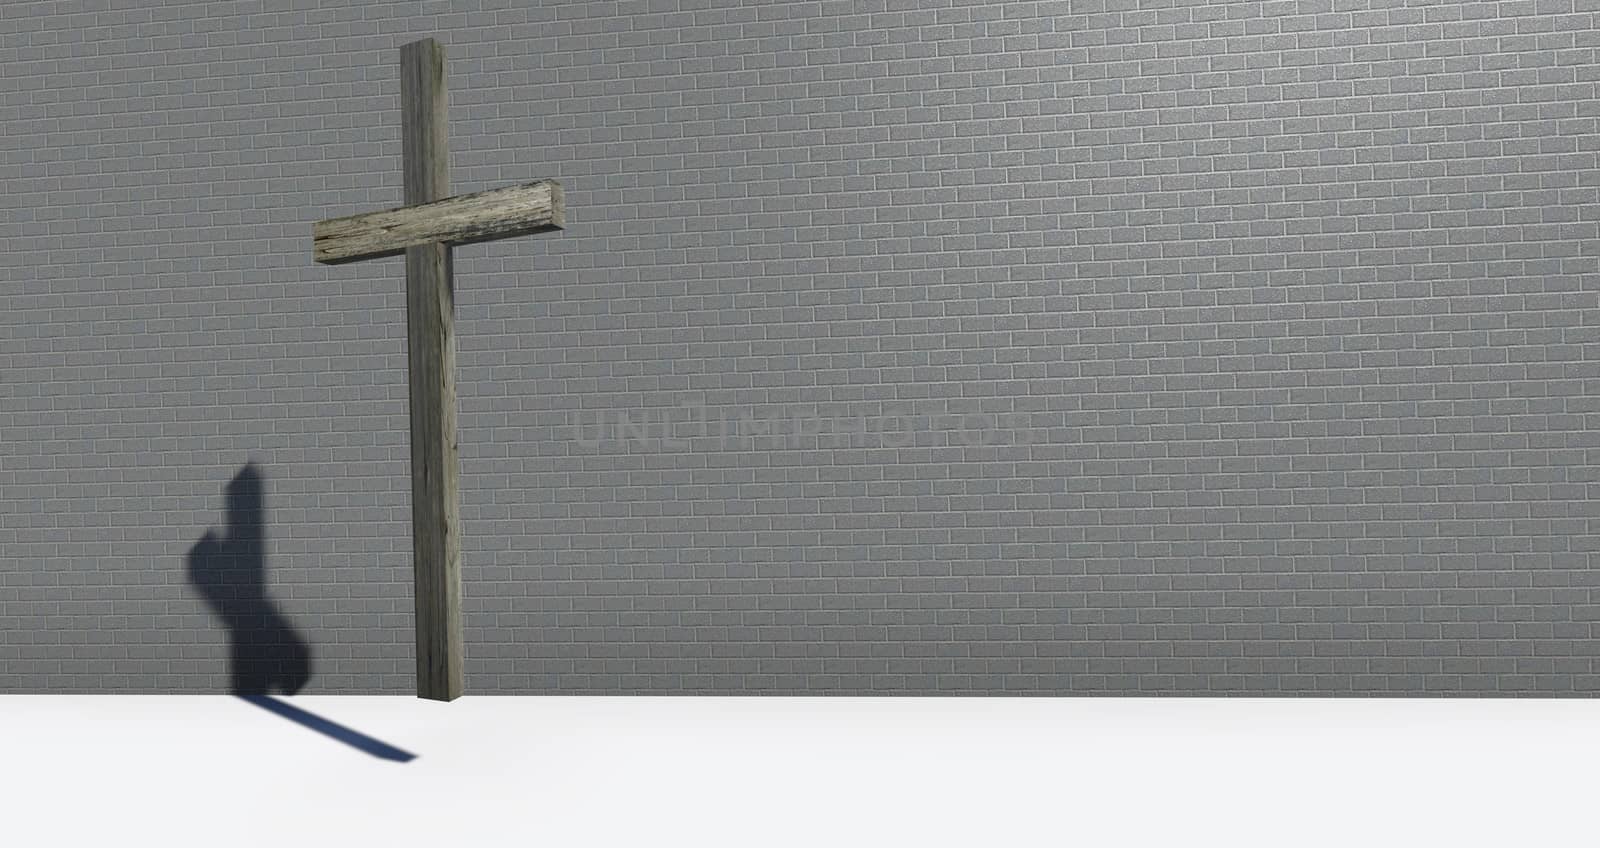 Cross on the wall made in 3d software